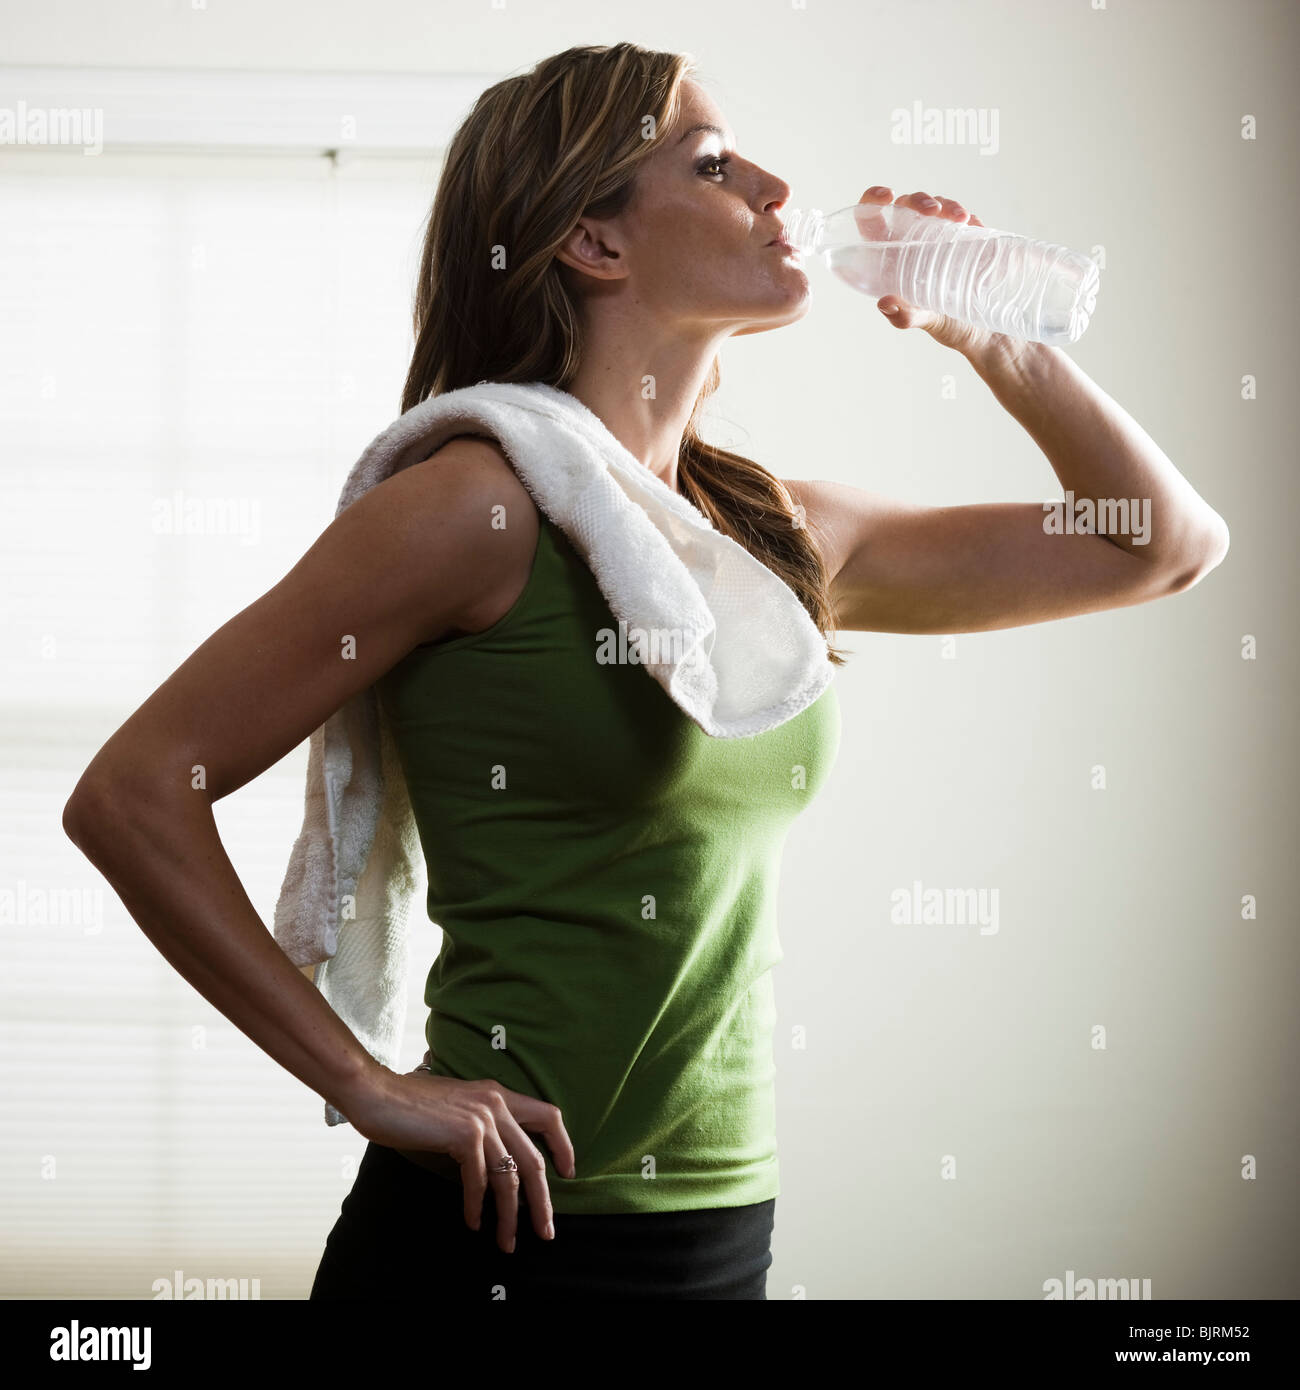 USA, Utah, Orem, young woman drinking water after exercising Stock Photo